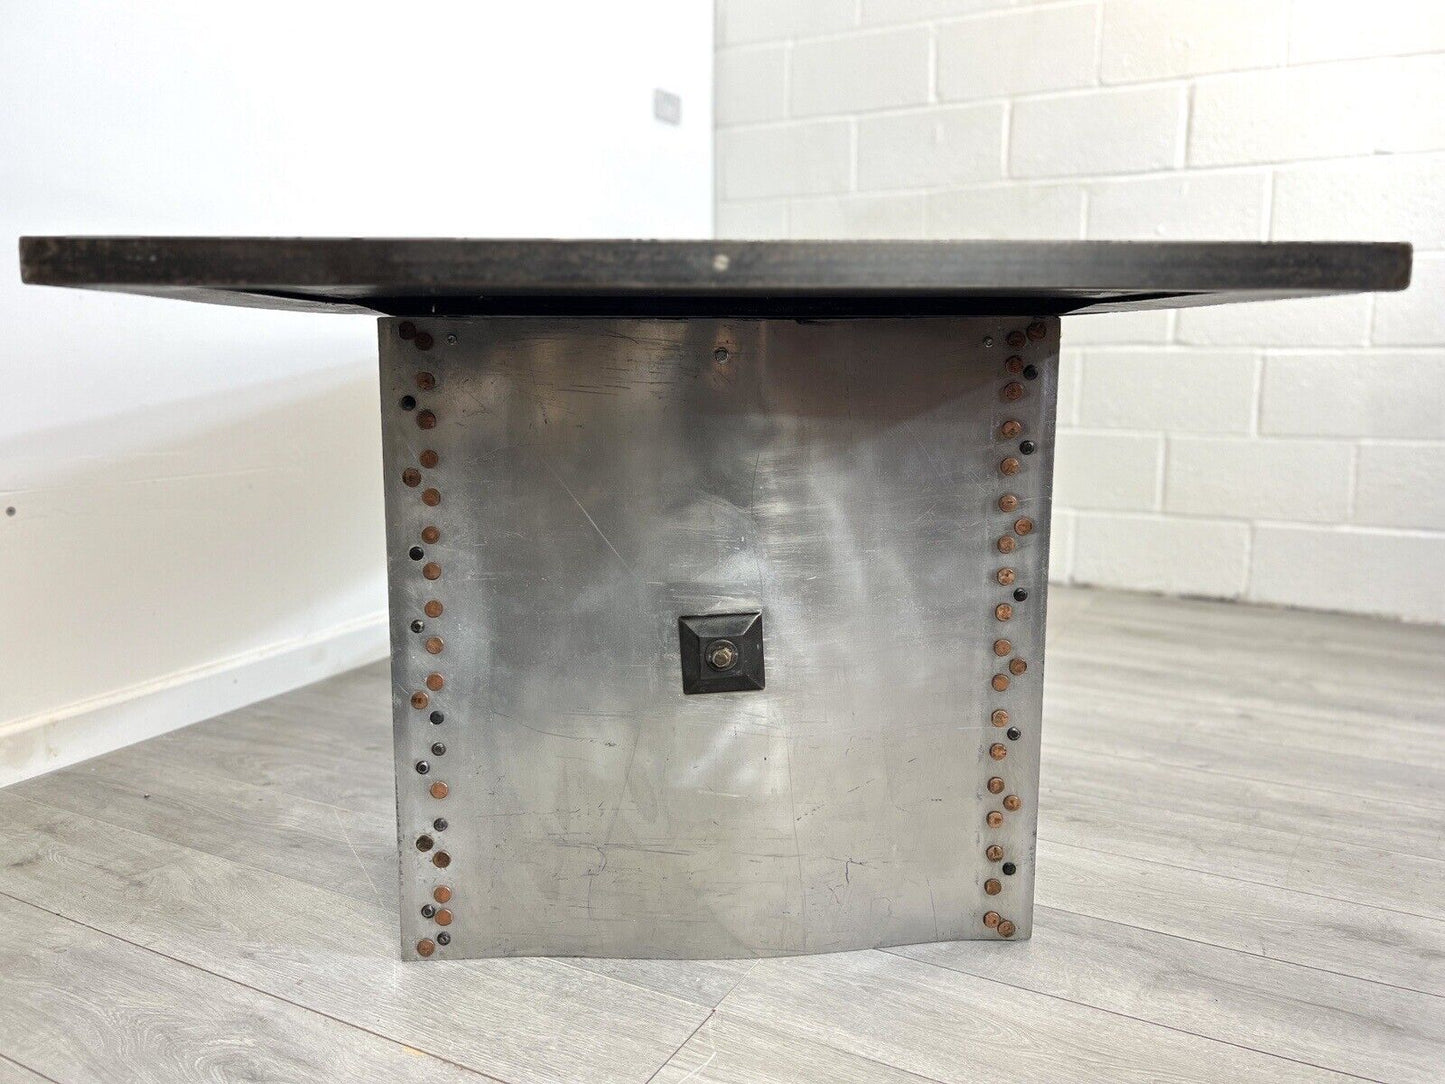 A Bespoke Industrial Aluminium and Iron Dining Table